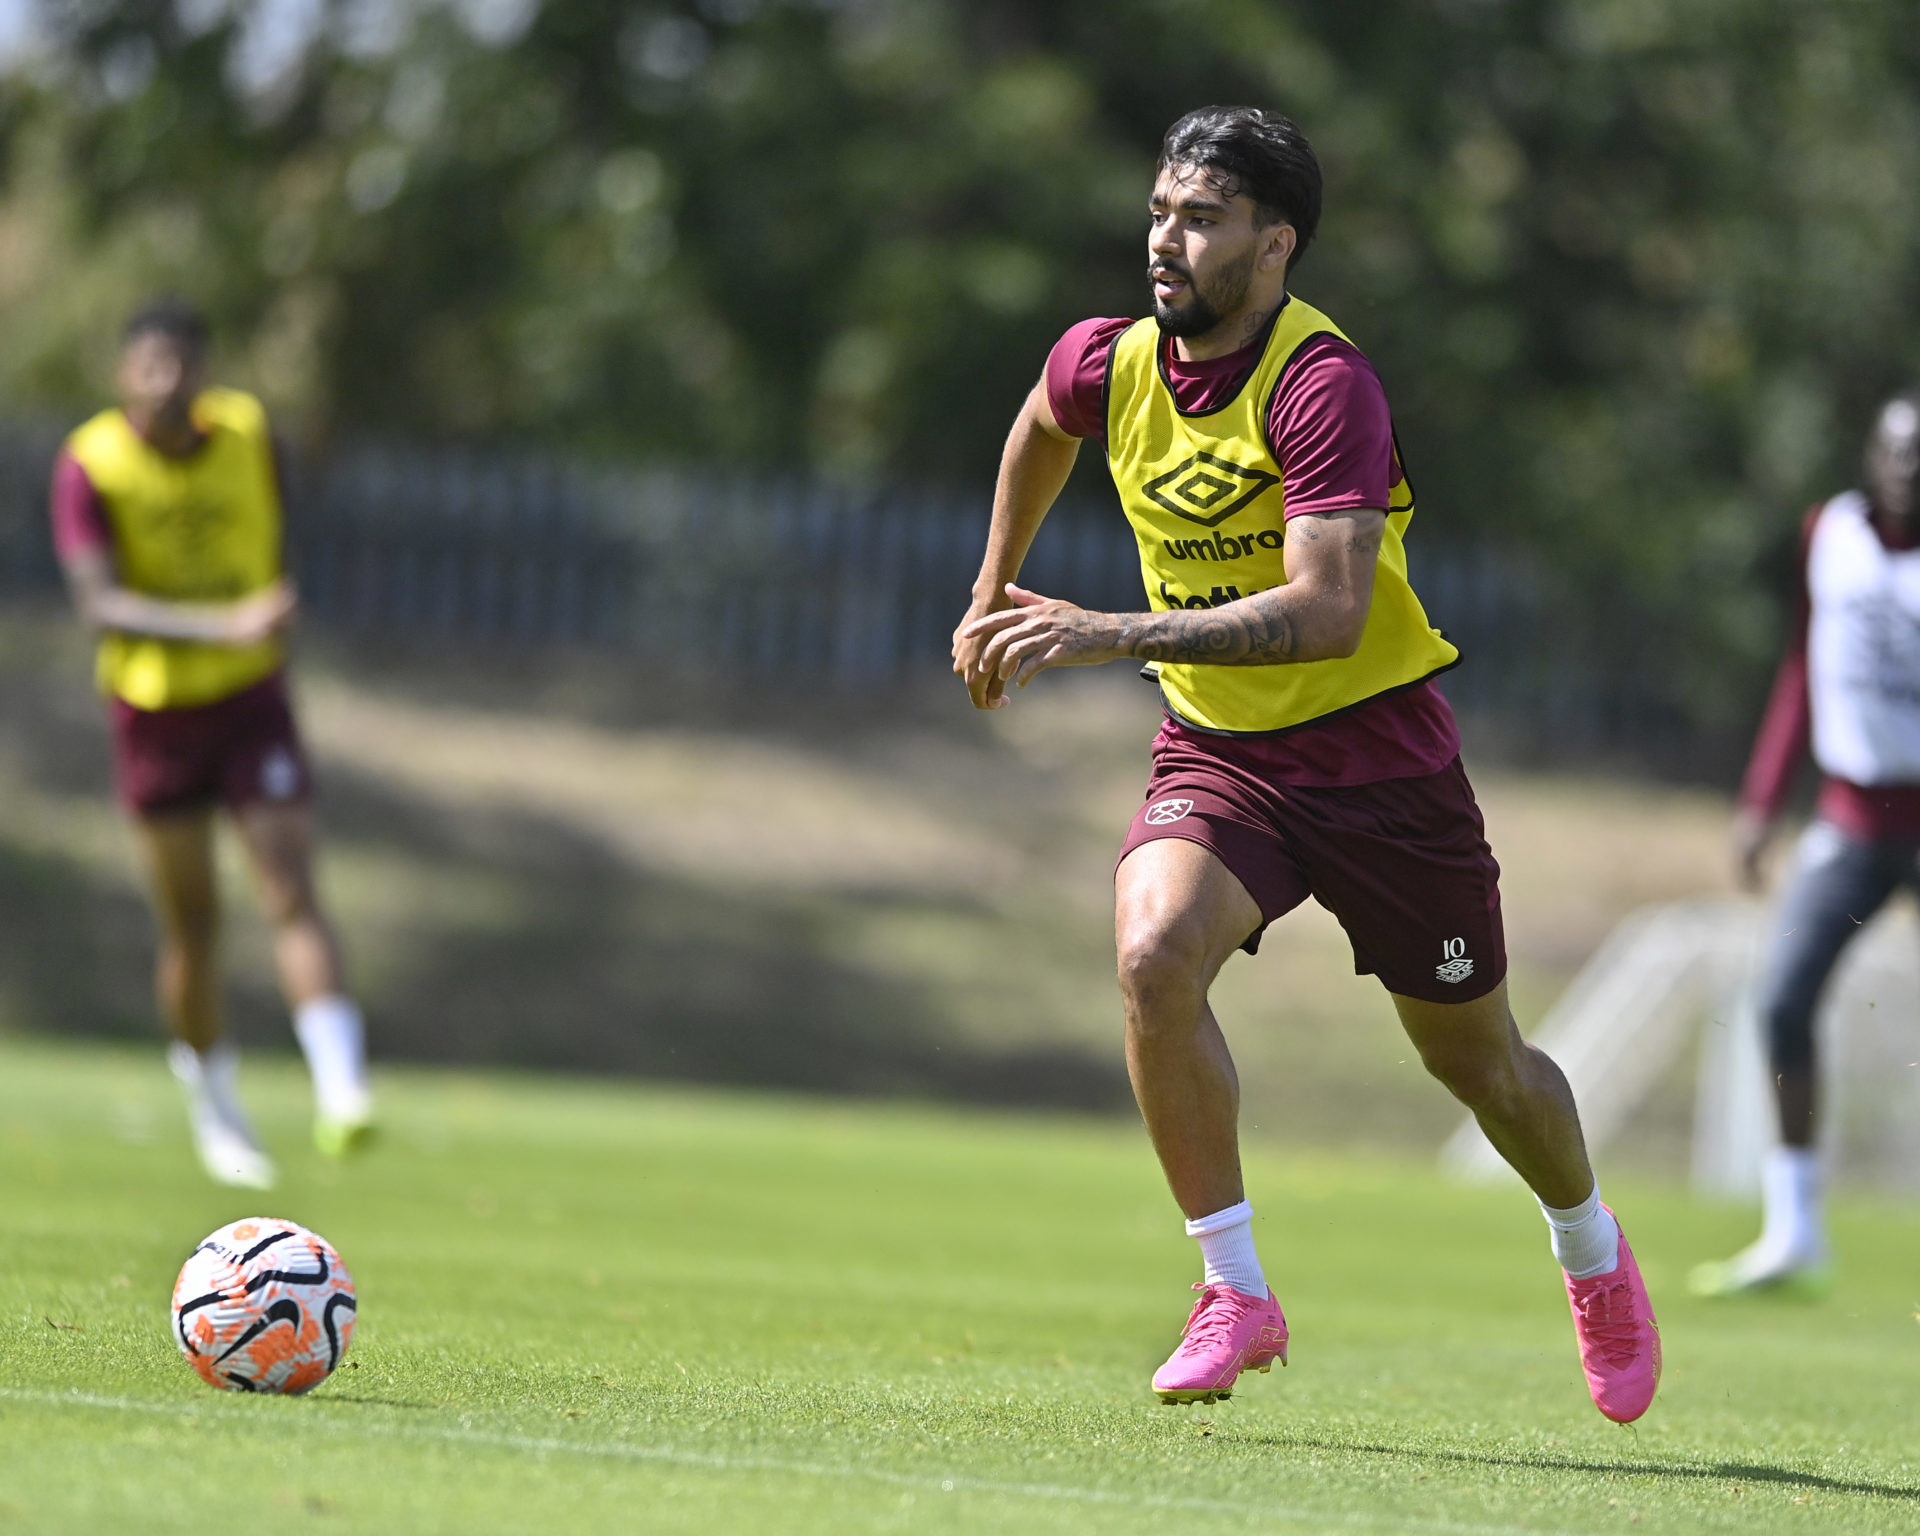 West Ham's Lucas Paquetá investigated by English Football